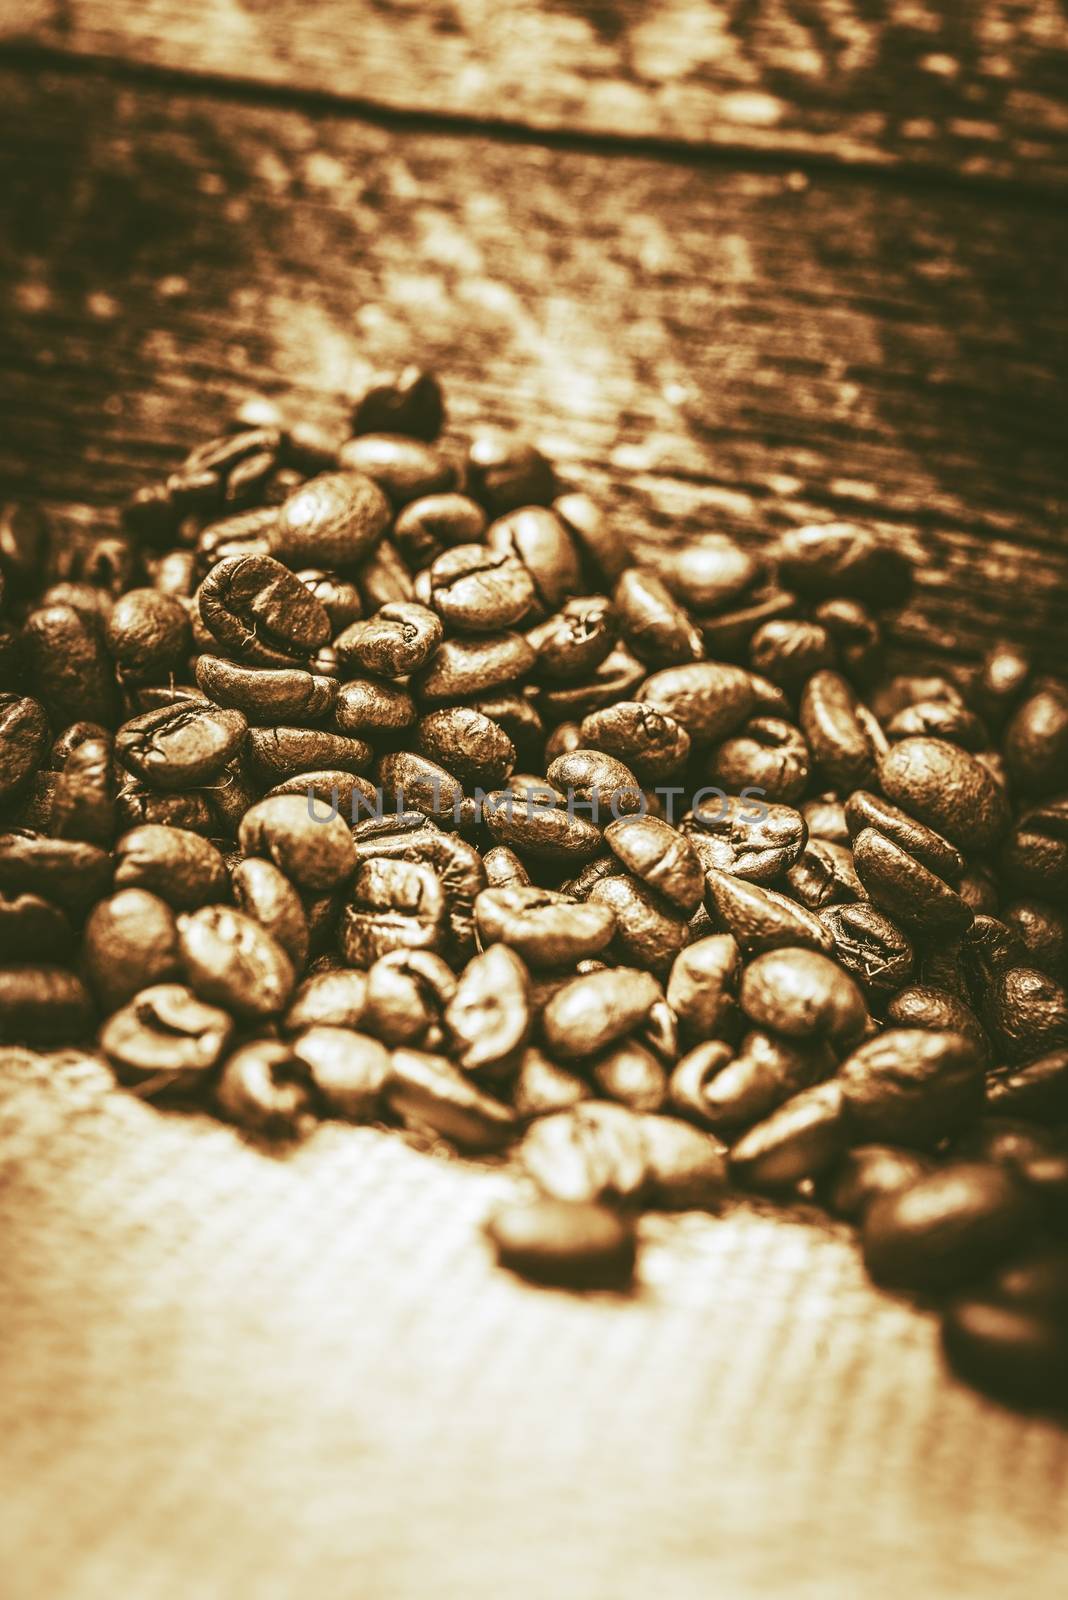 Freshly Roasted Coffee Beans Closeup Photo. Vintage Color Grading Coffee Concept.